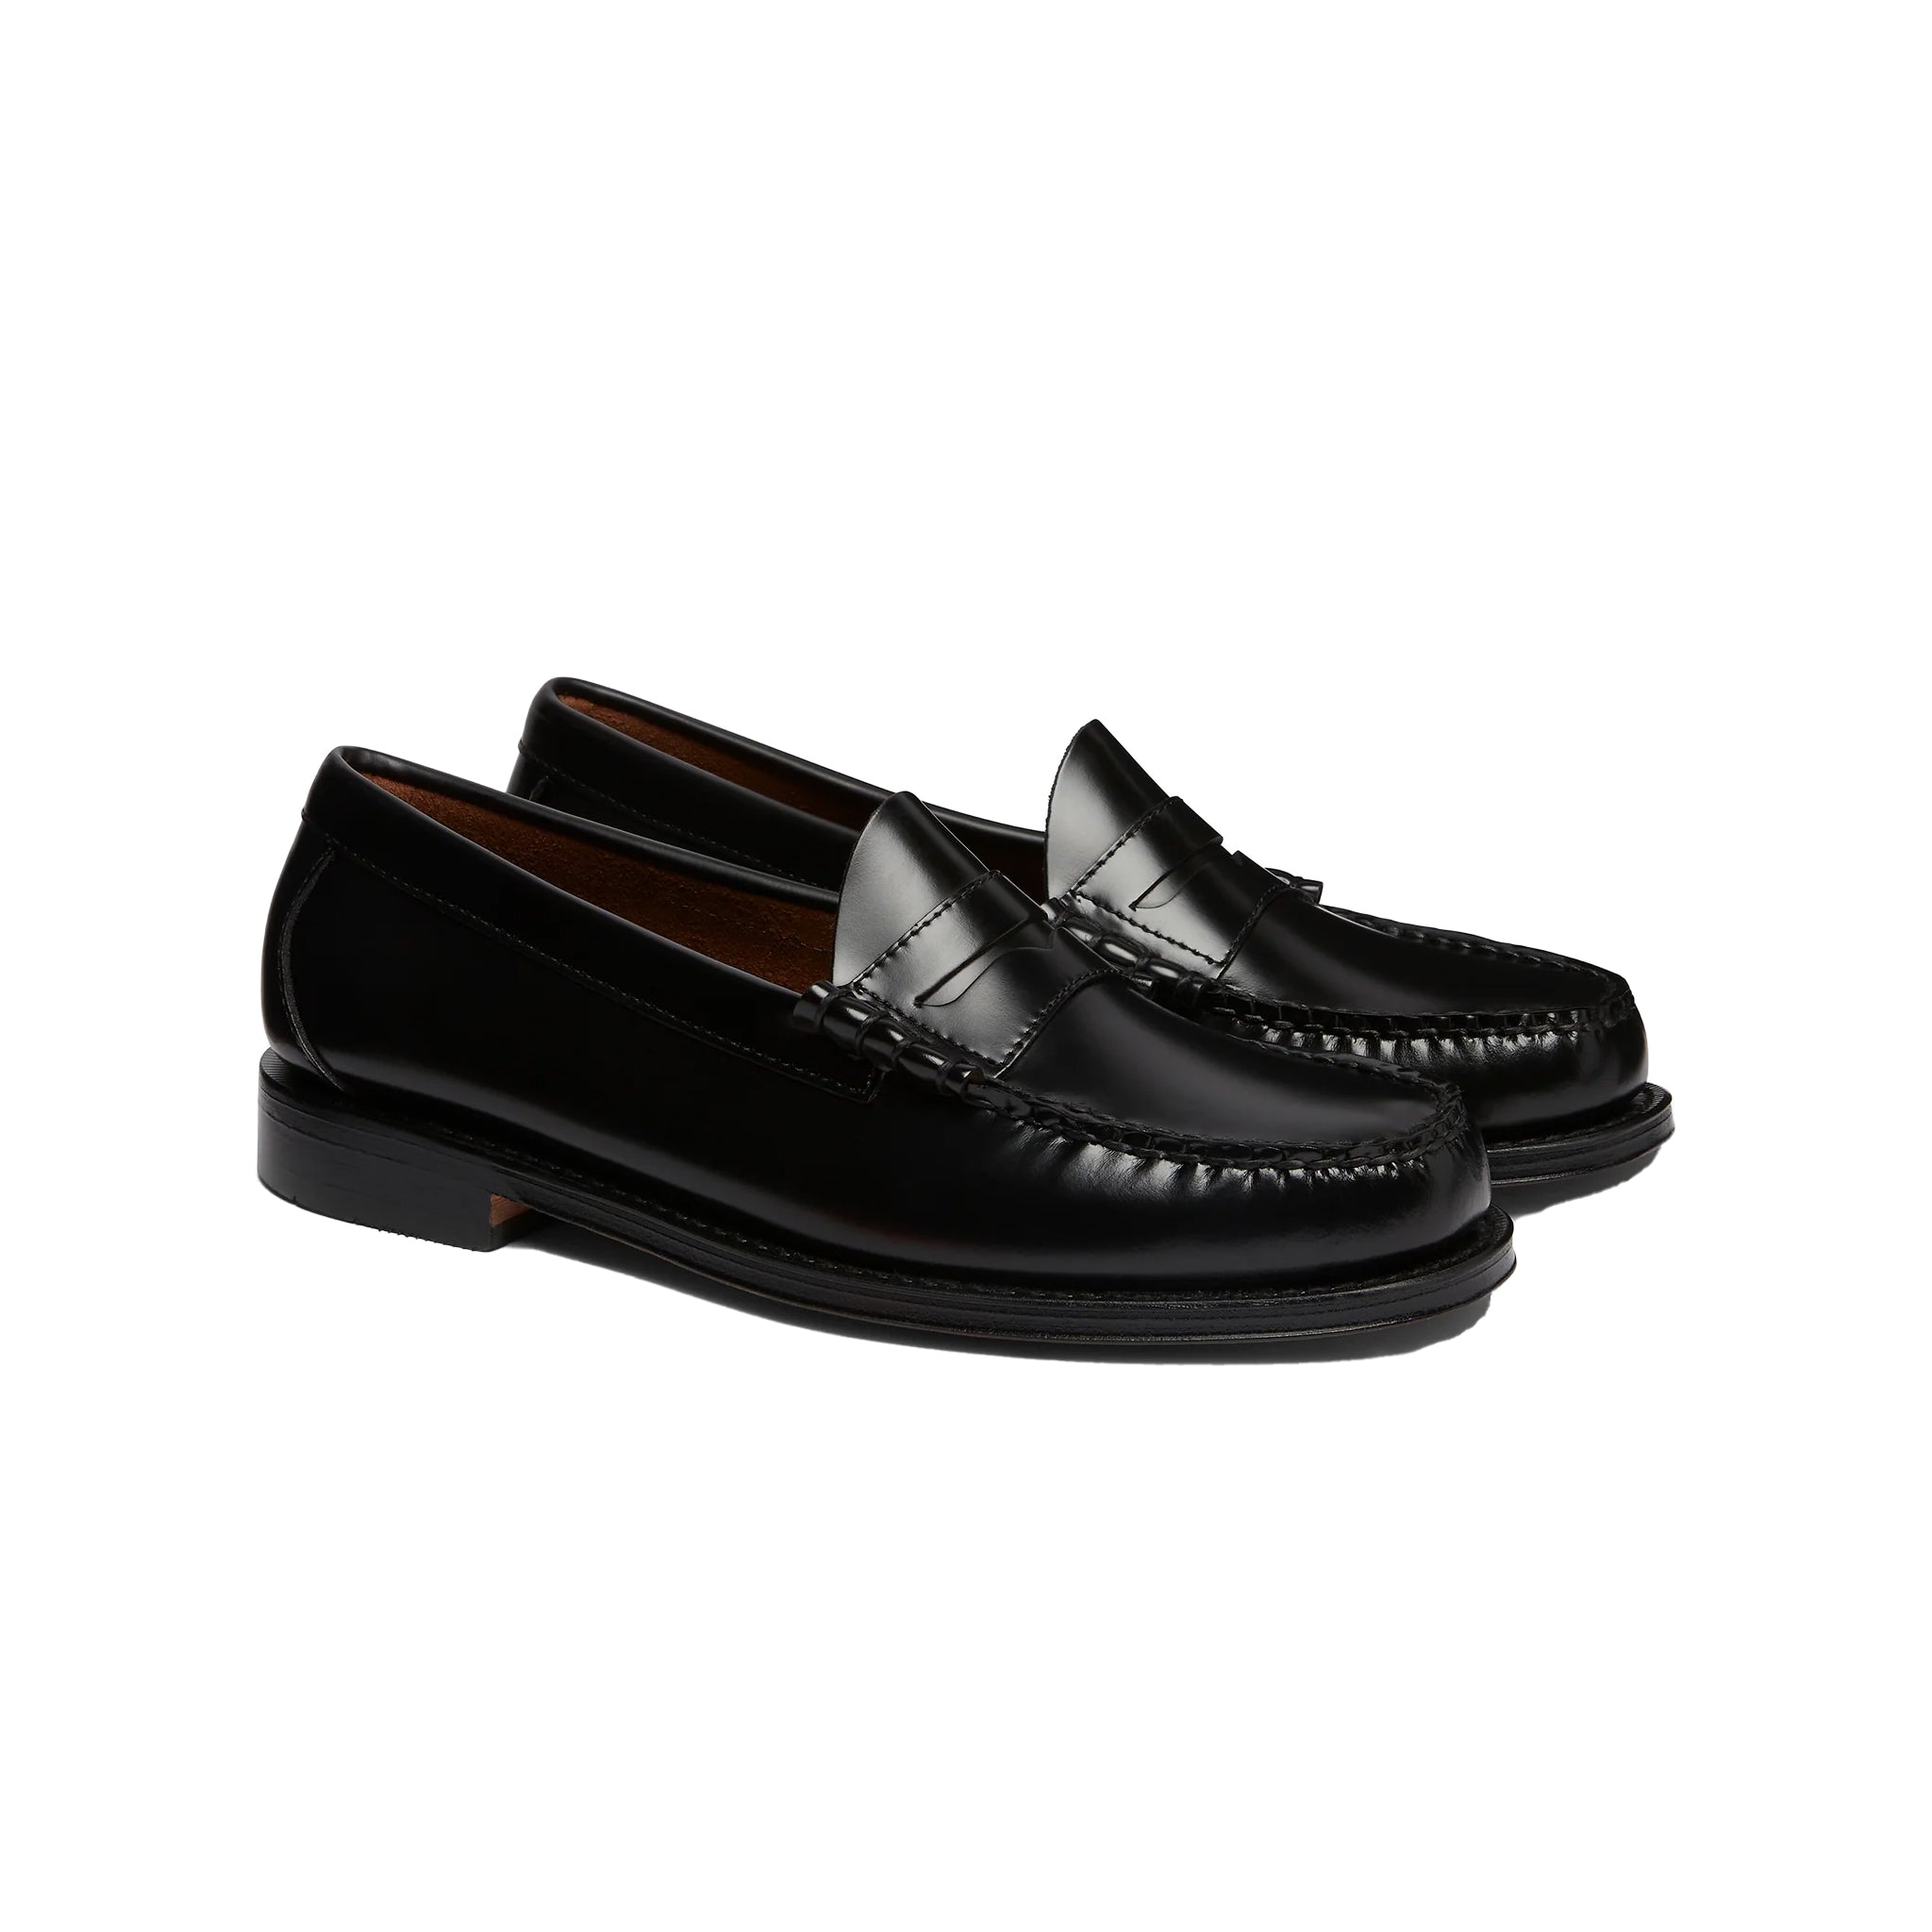 G.H.Bass Weejuns Larson Penny Loafer - Black – American Classics London